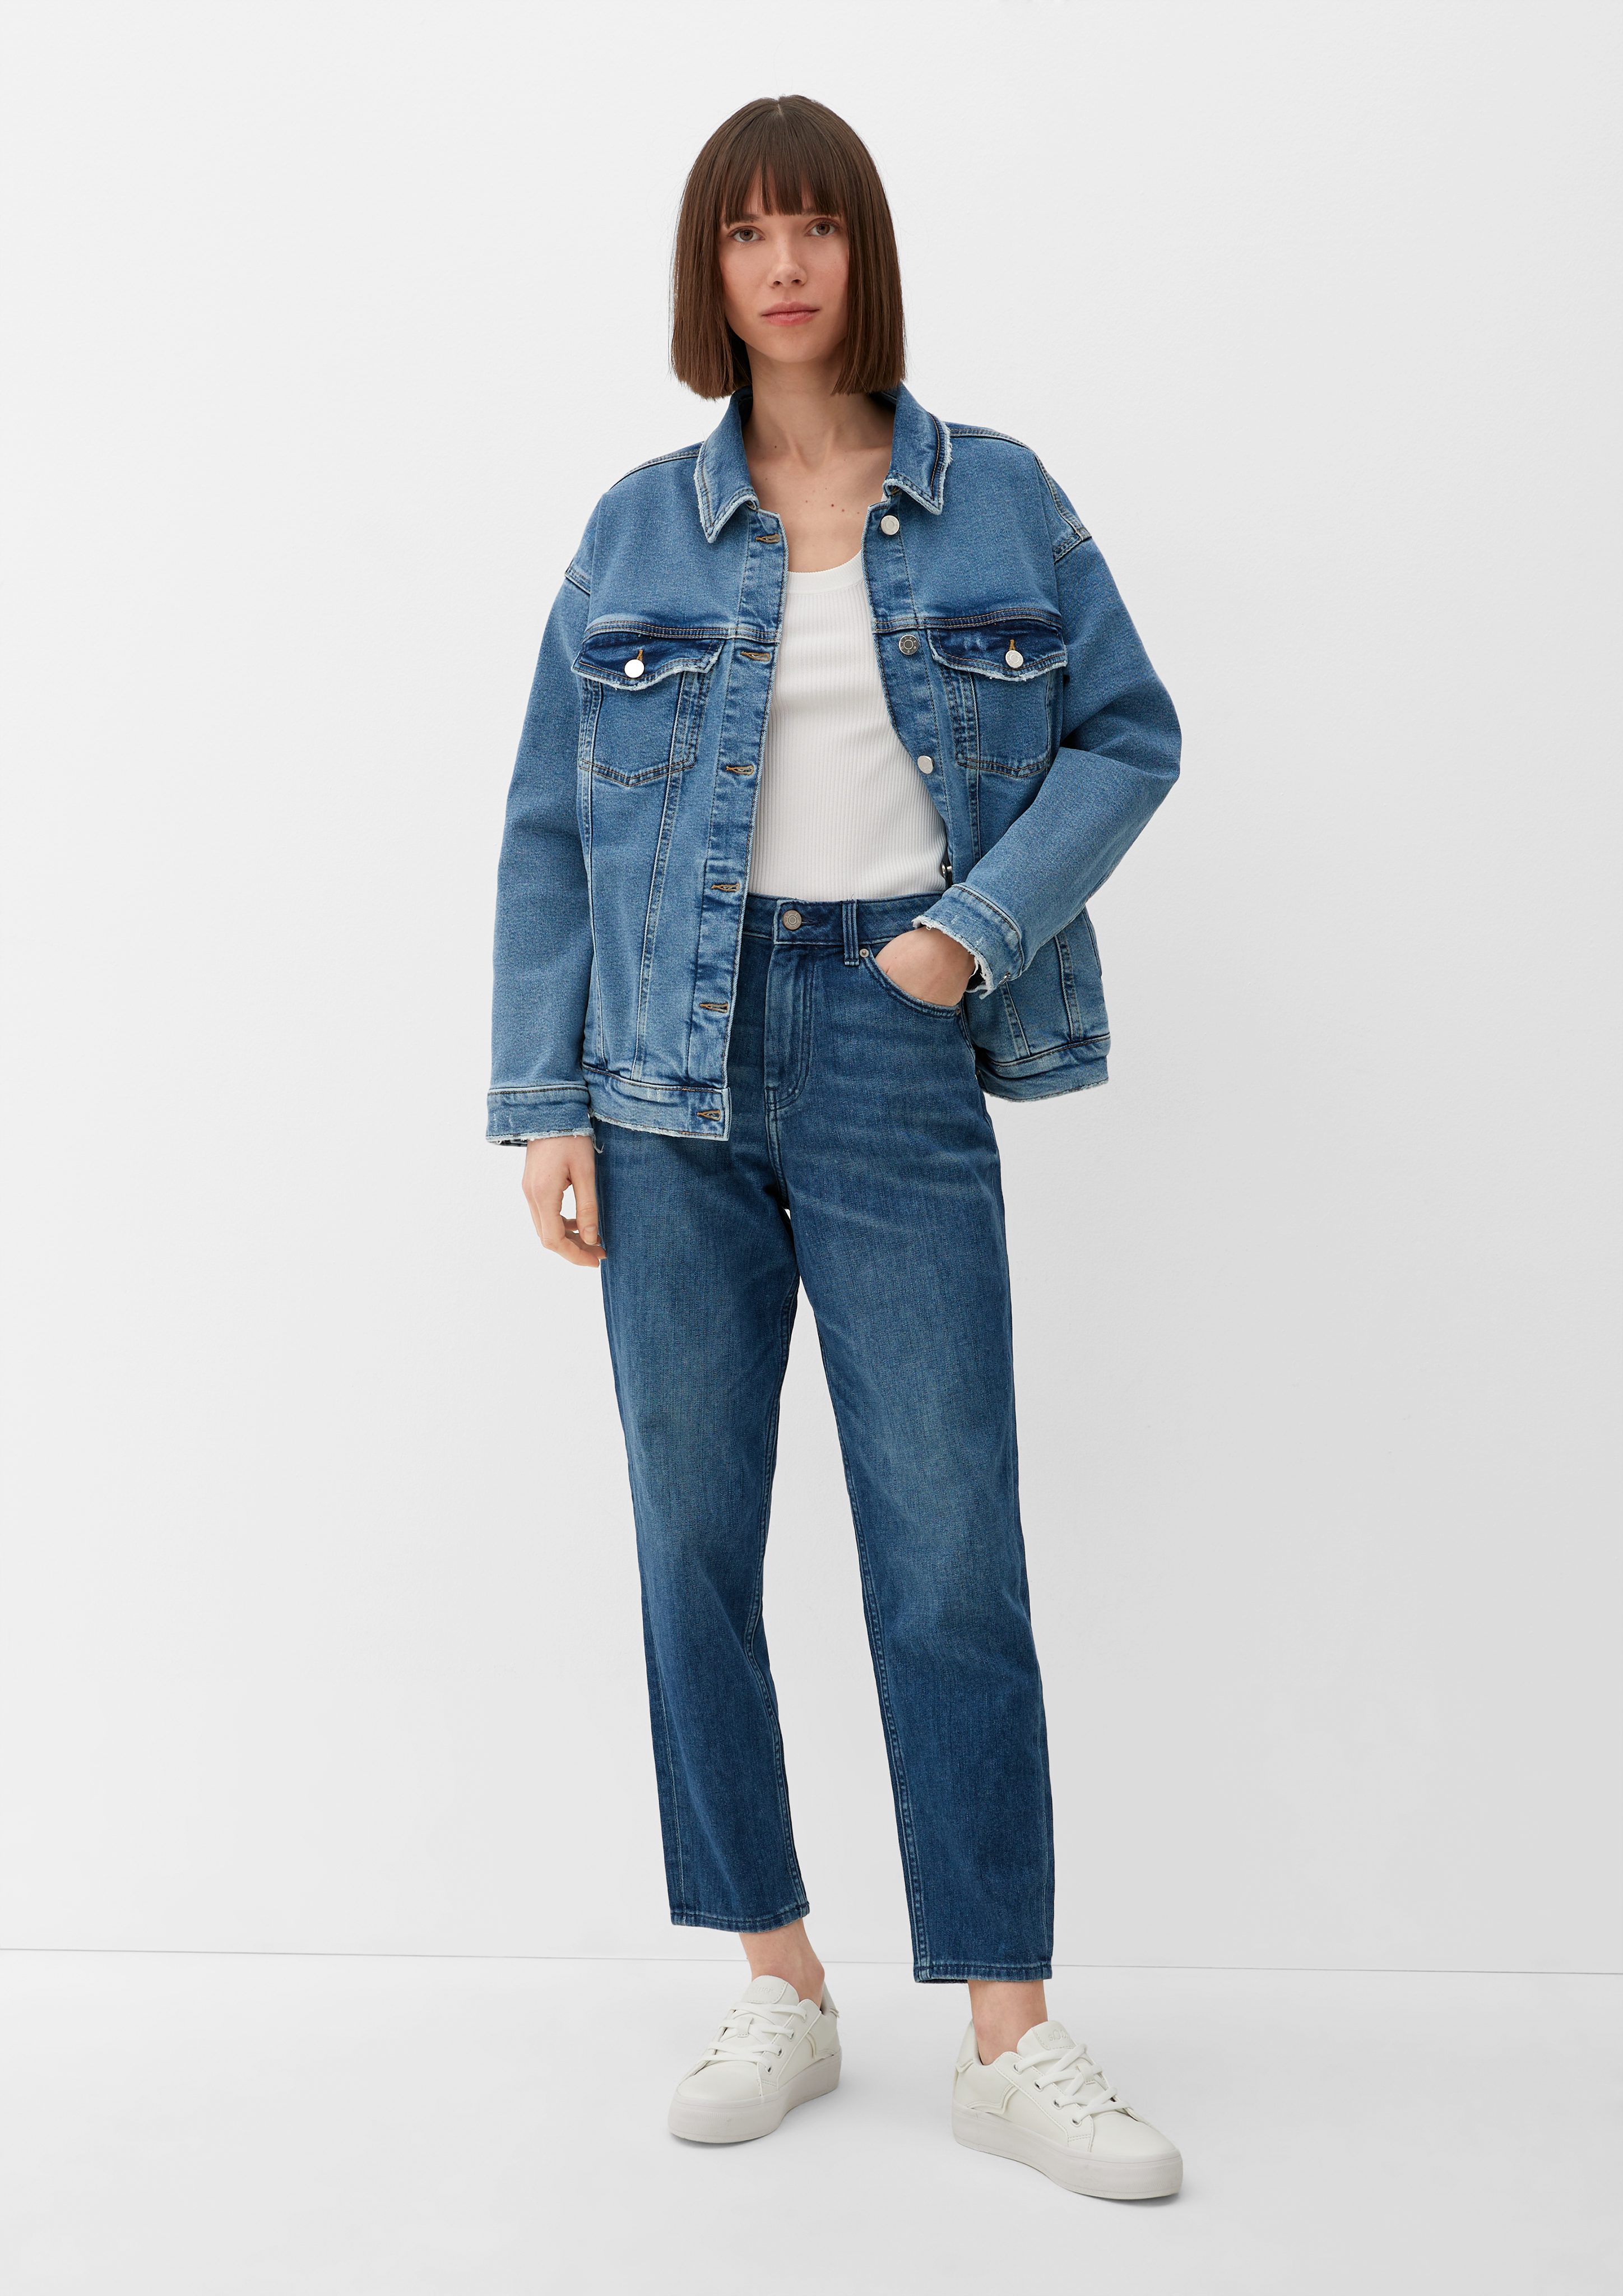 s.Oliver 7/8-Jeans Regular: Jeans im Mom-Fit Label-Patch, Waschung | 7/8-Jeans